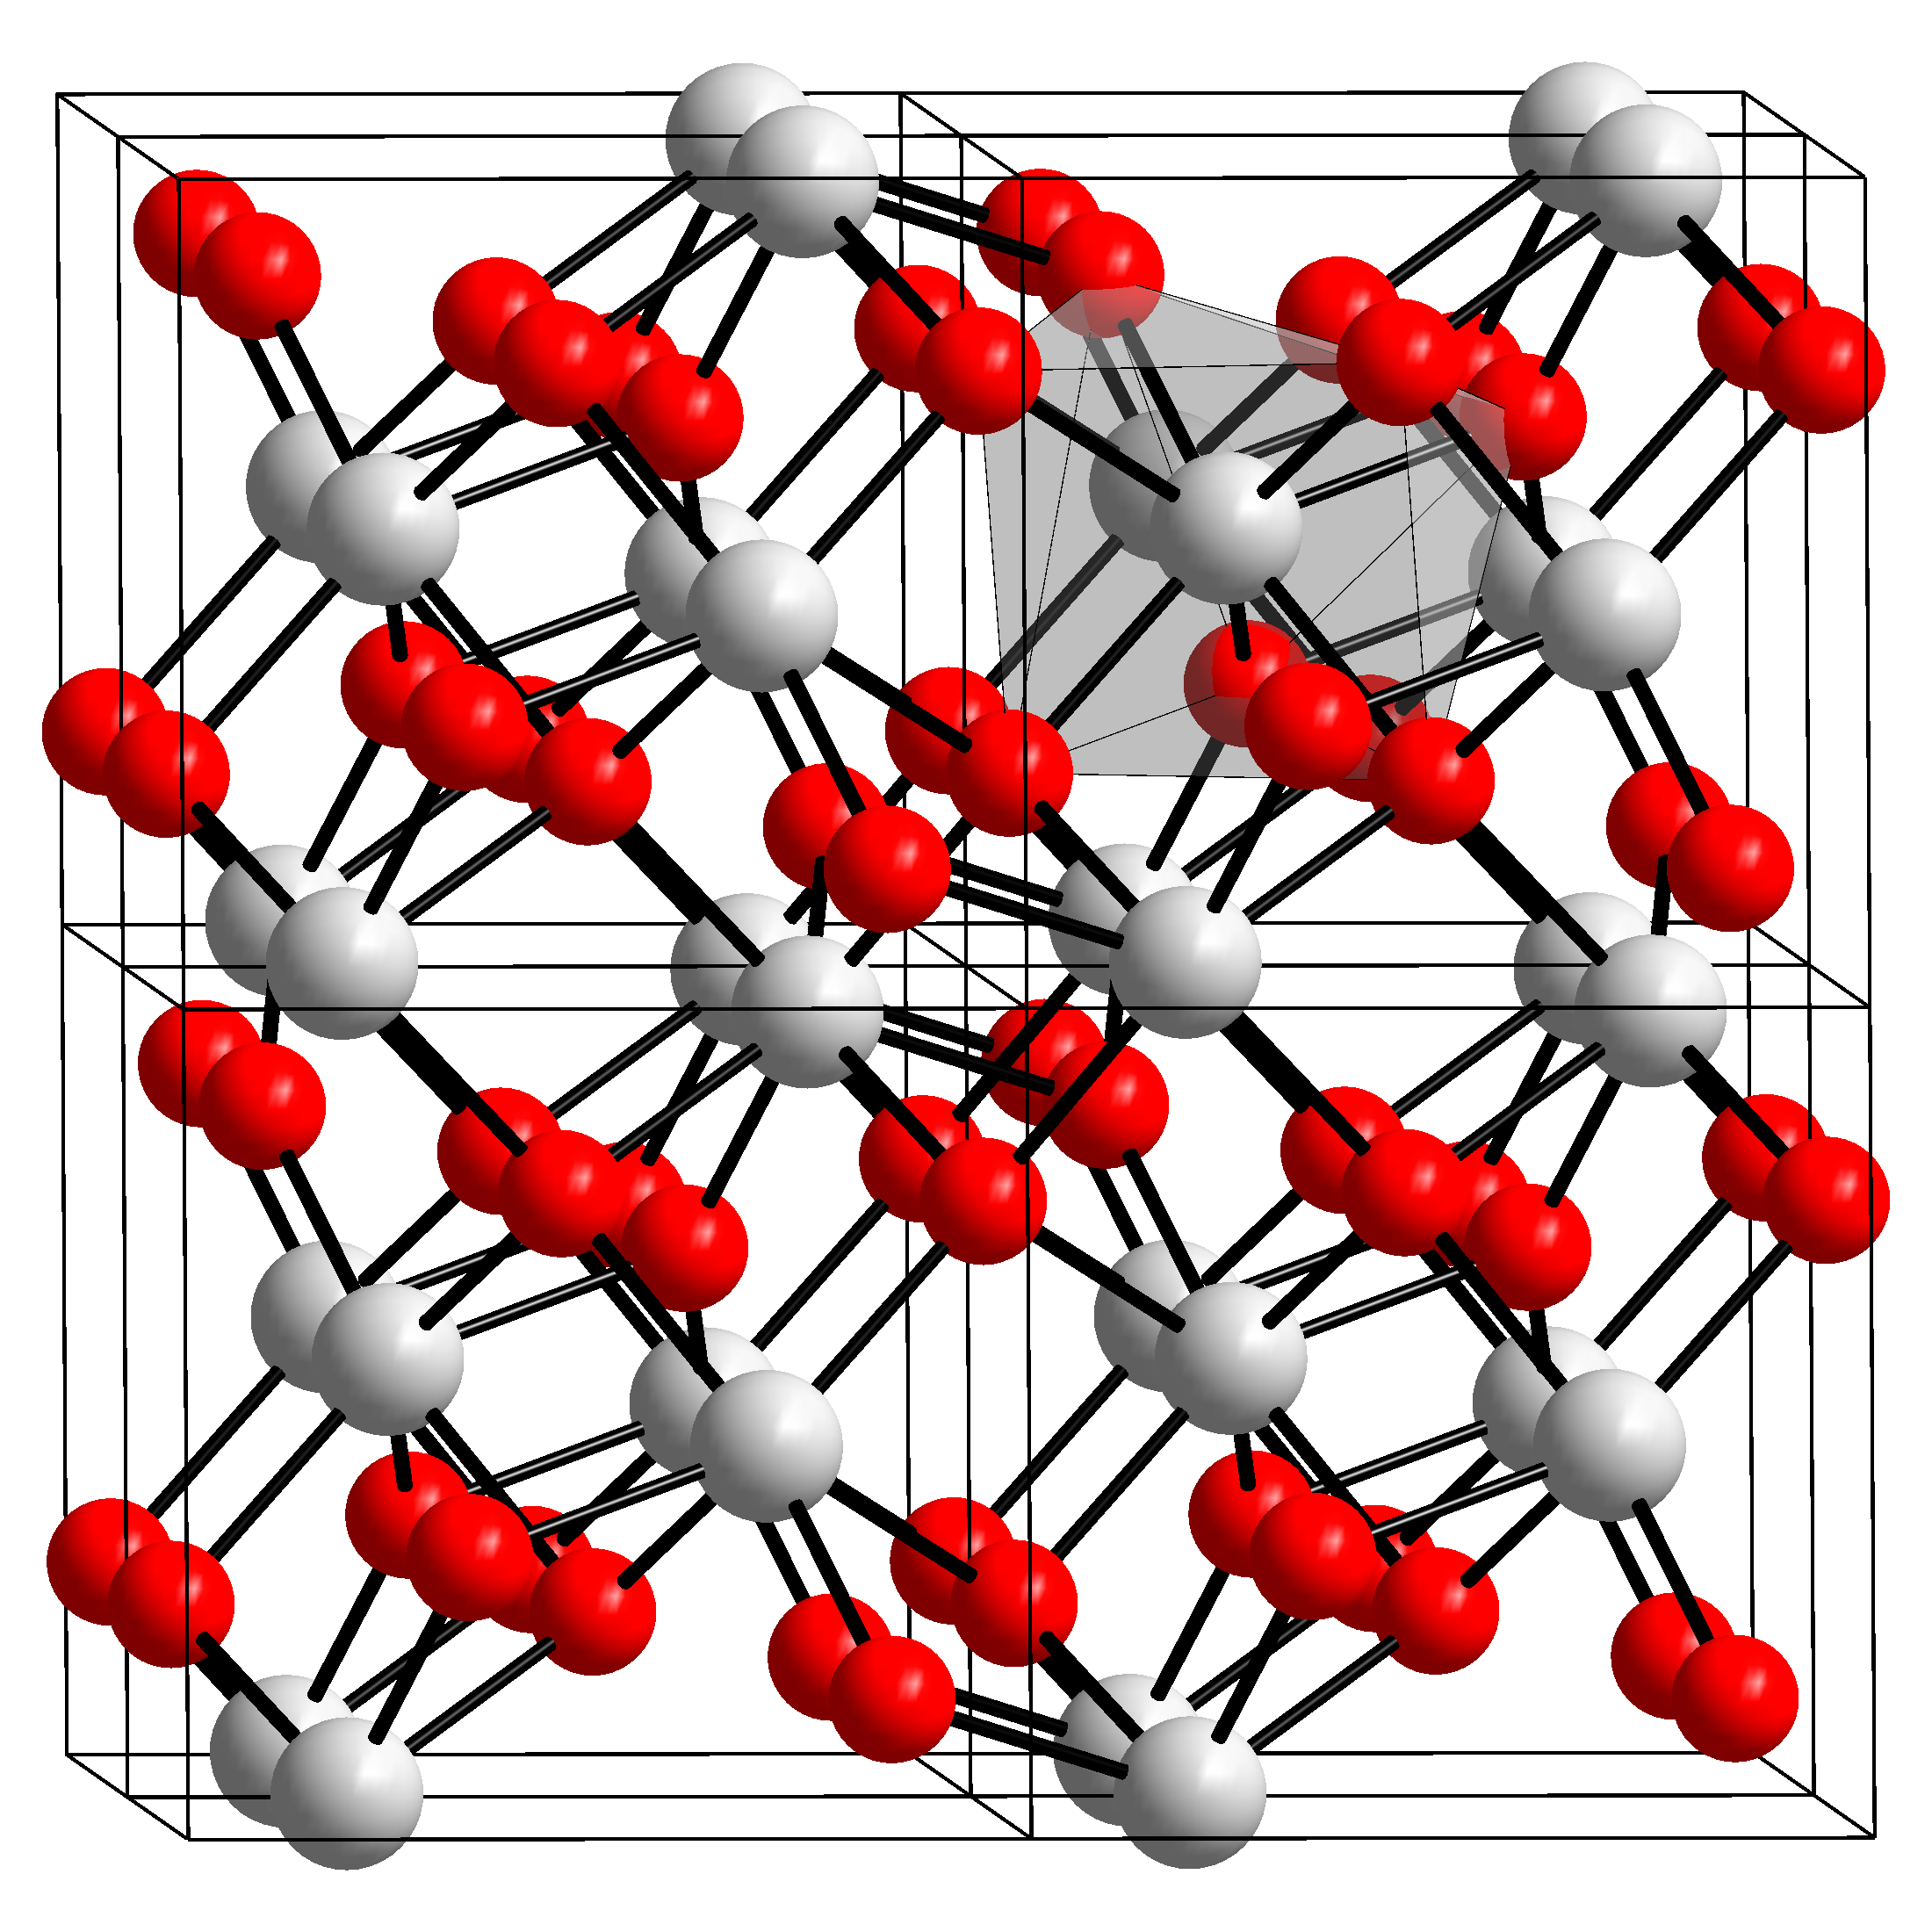 Crystal structure of Zirconia dioxide